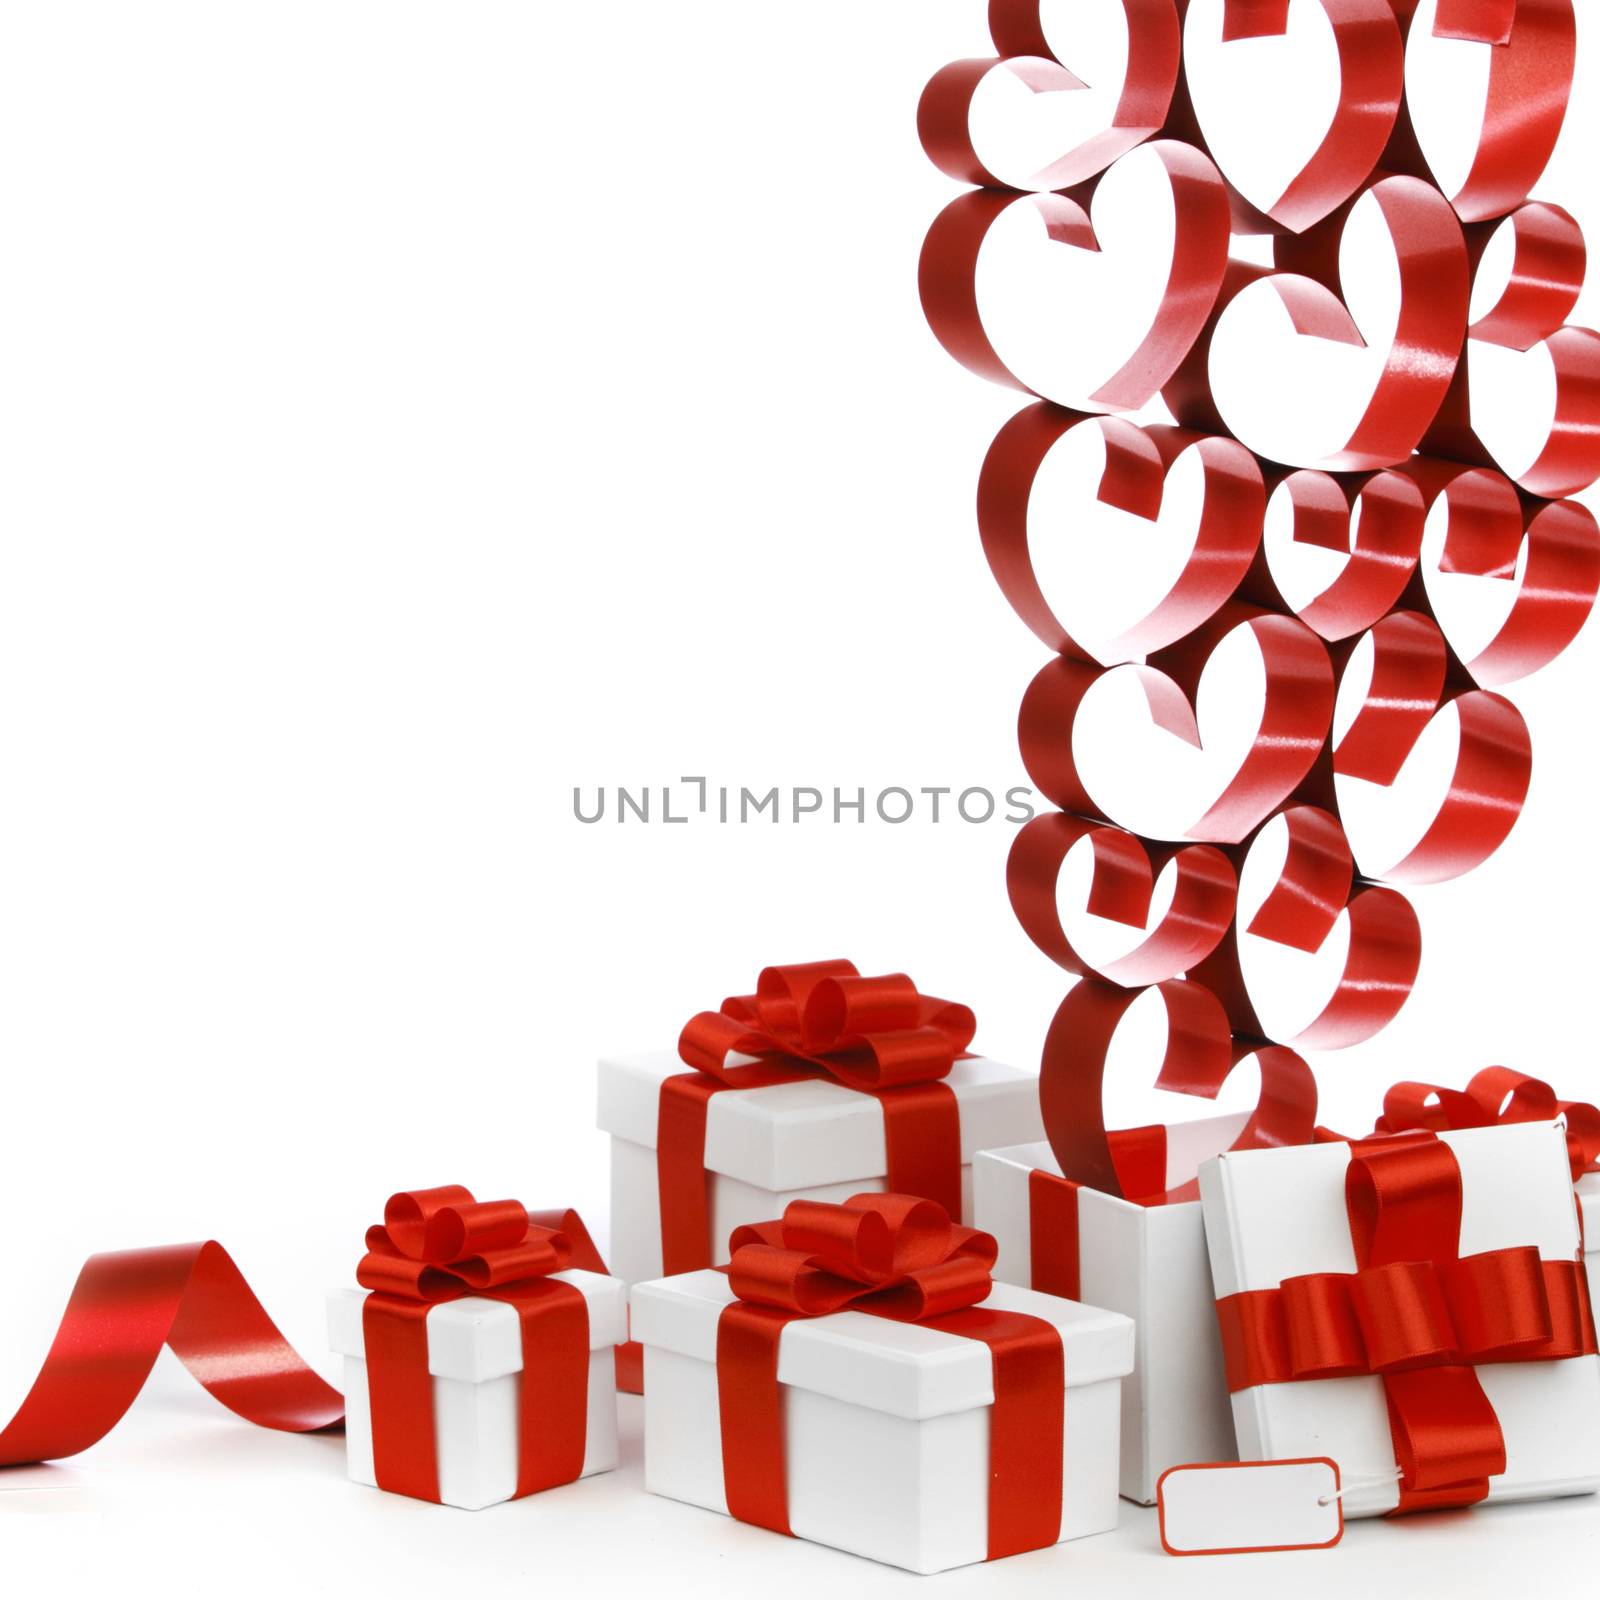 White boxes with red ribbons and decorative hearts isolated on white background